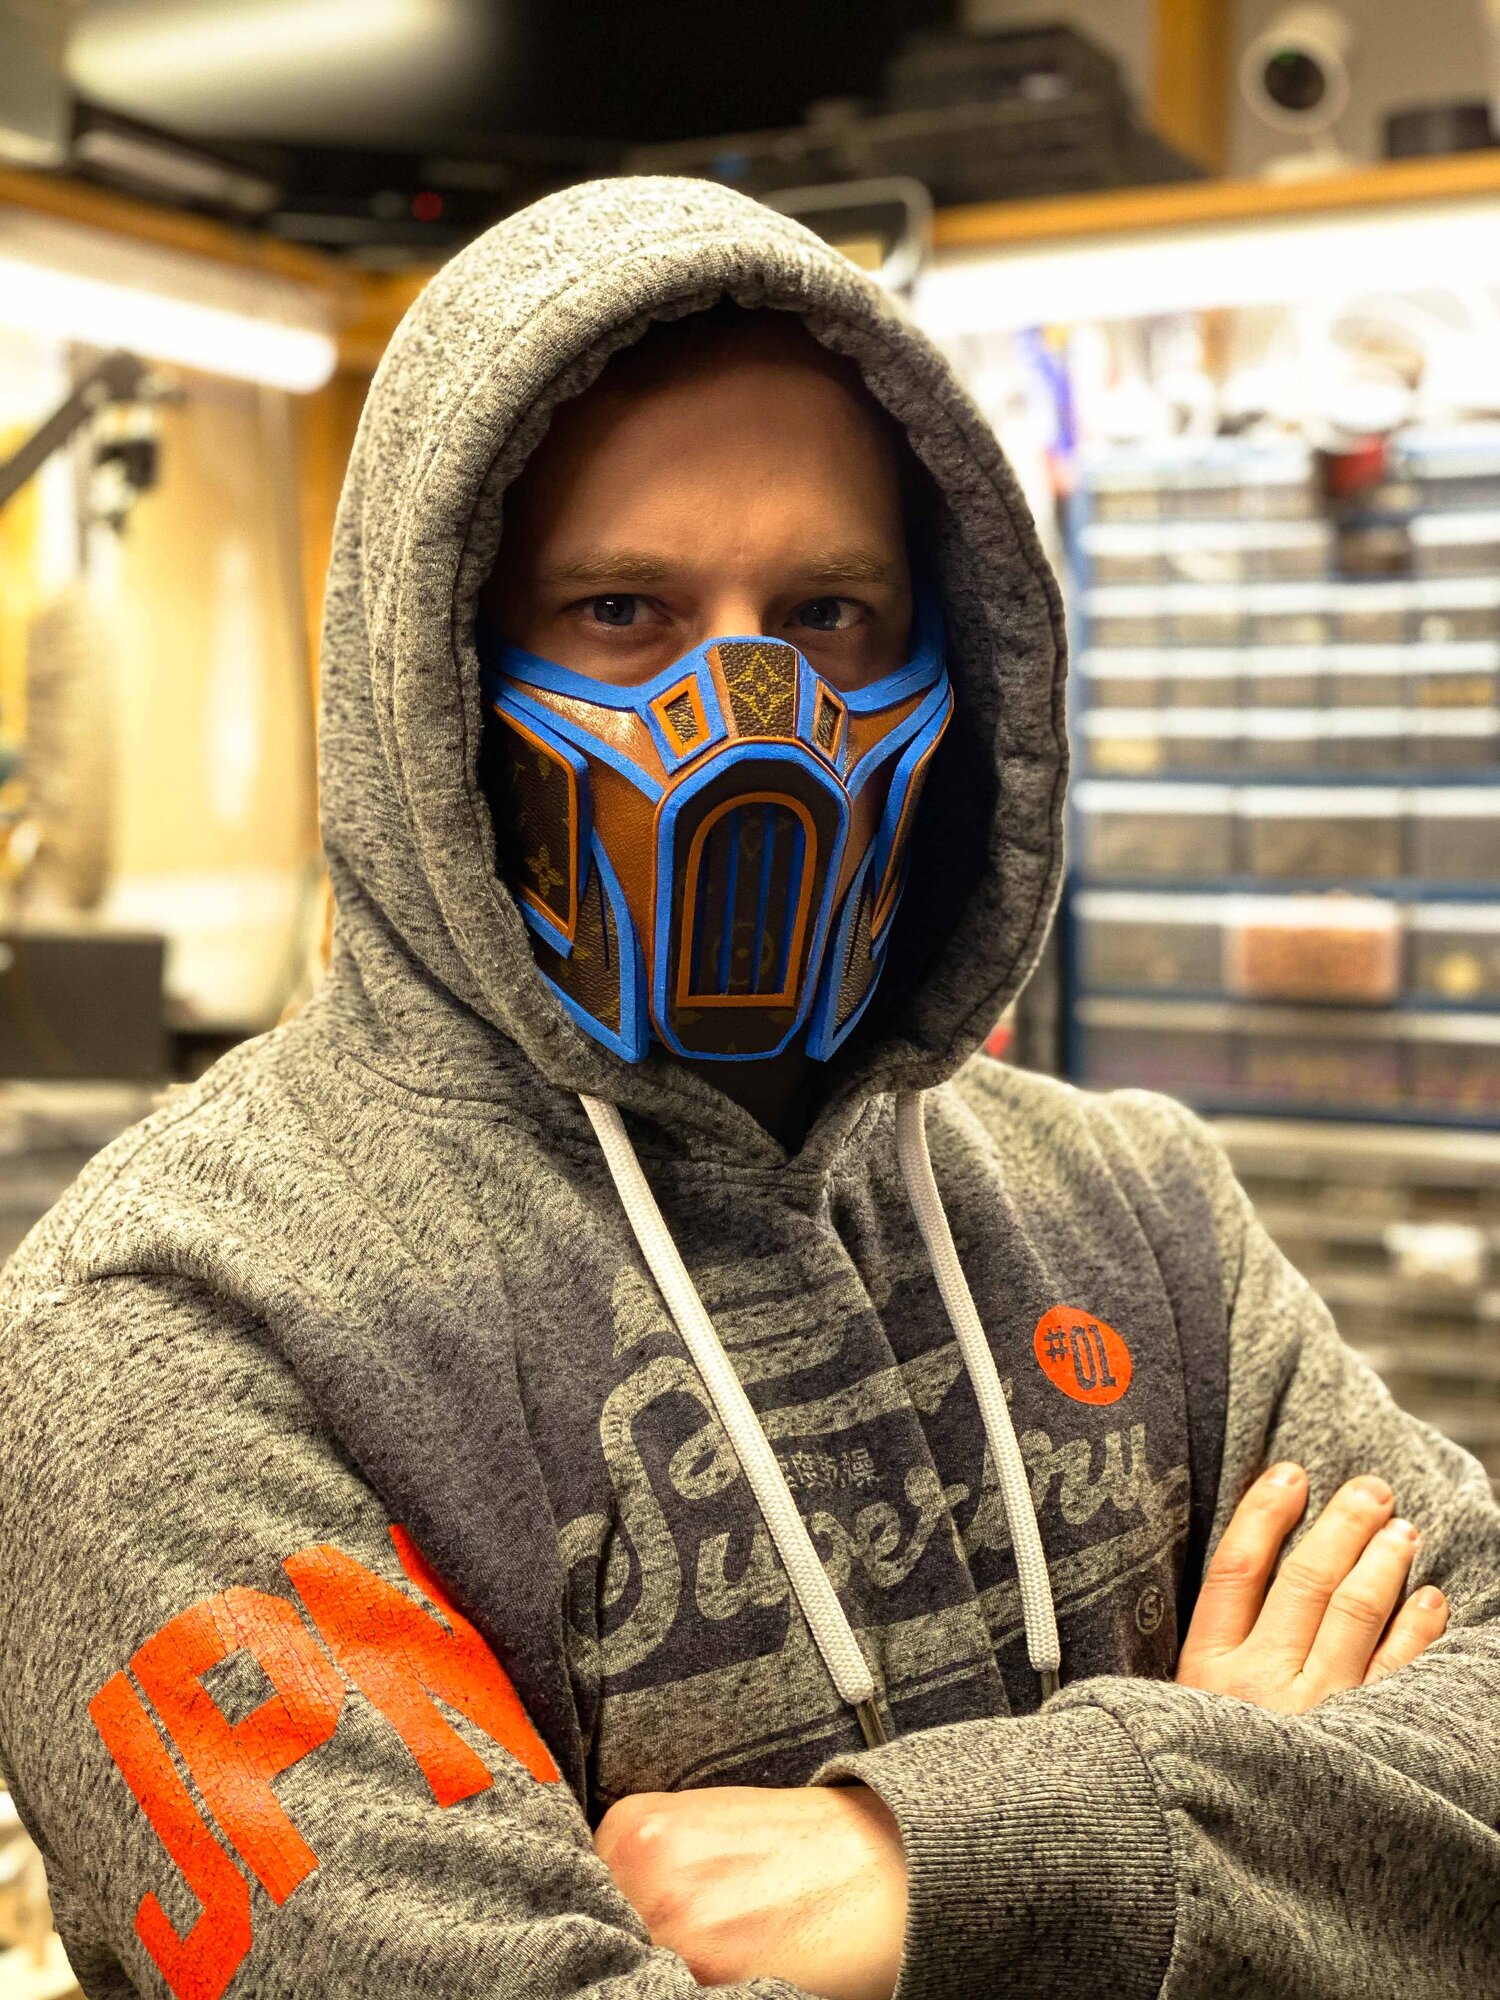 Showing Off My $2,000 Louis Vuitton Sub-Zero Face Mask  The people have  been asking where I got my Louis Vuitton Sub-Zero face mask! Here I am  debuting it on my Twitch